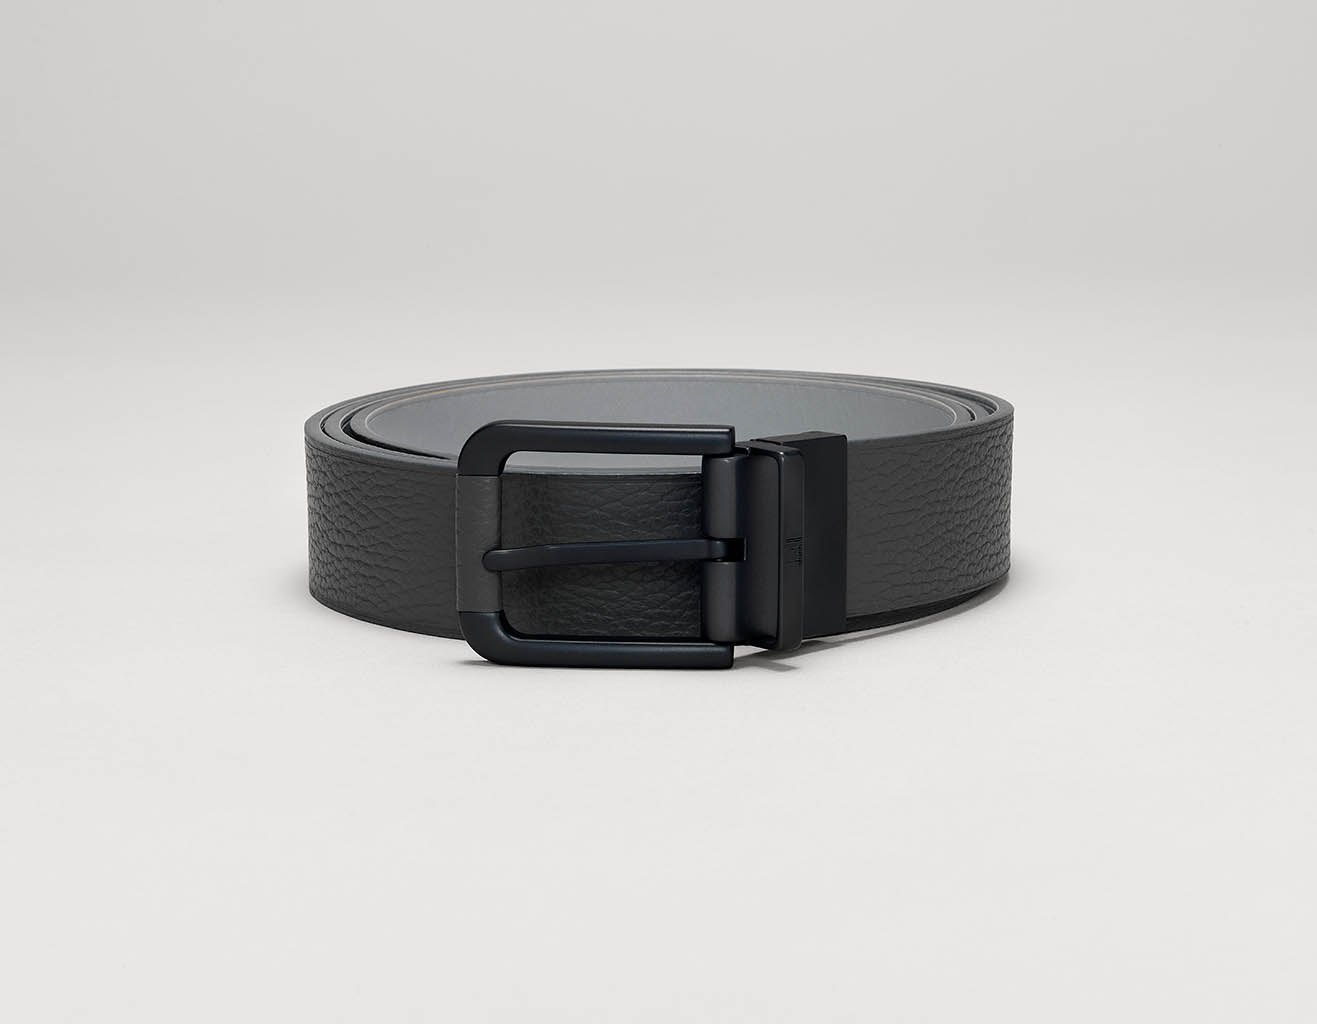 Fashion Photography of Alfred Dunhill belt by Packshot Factory